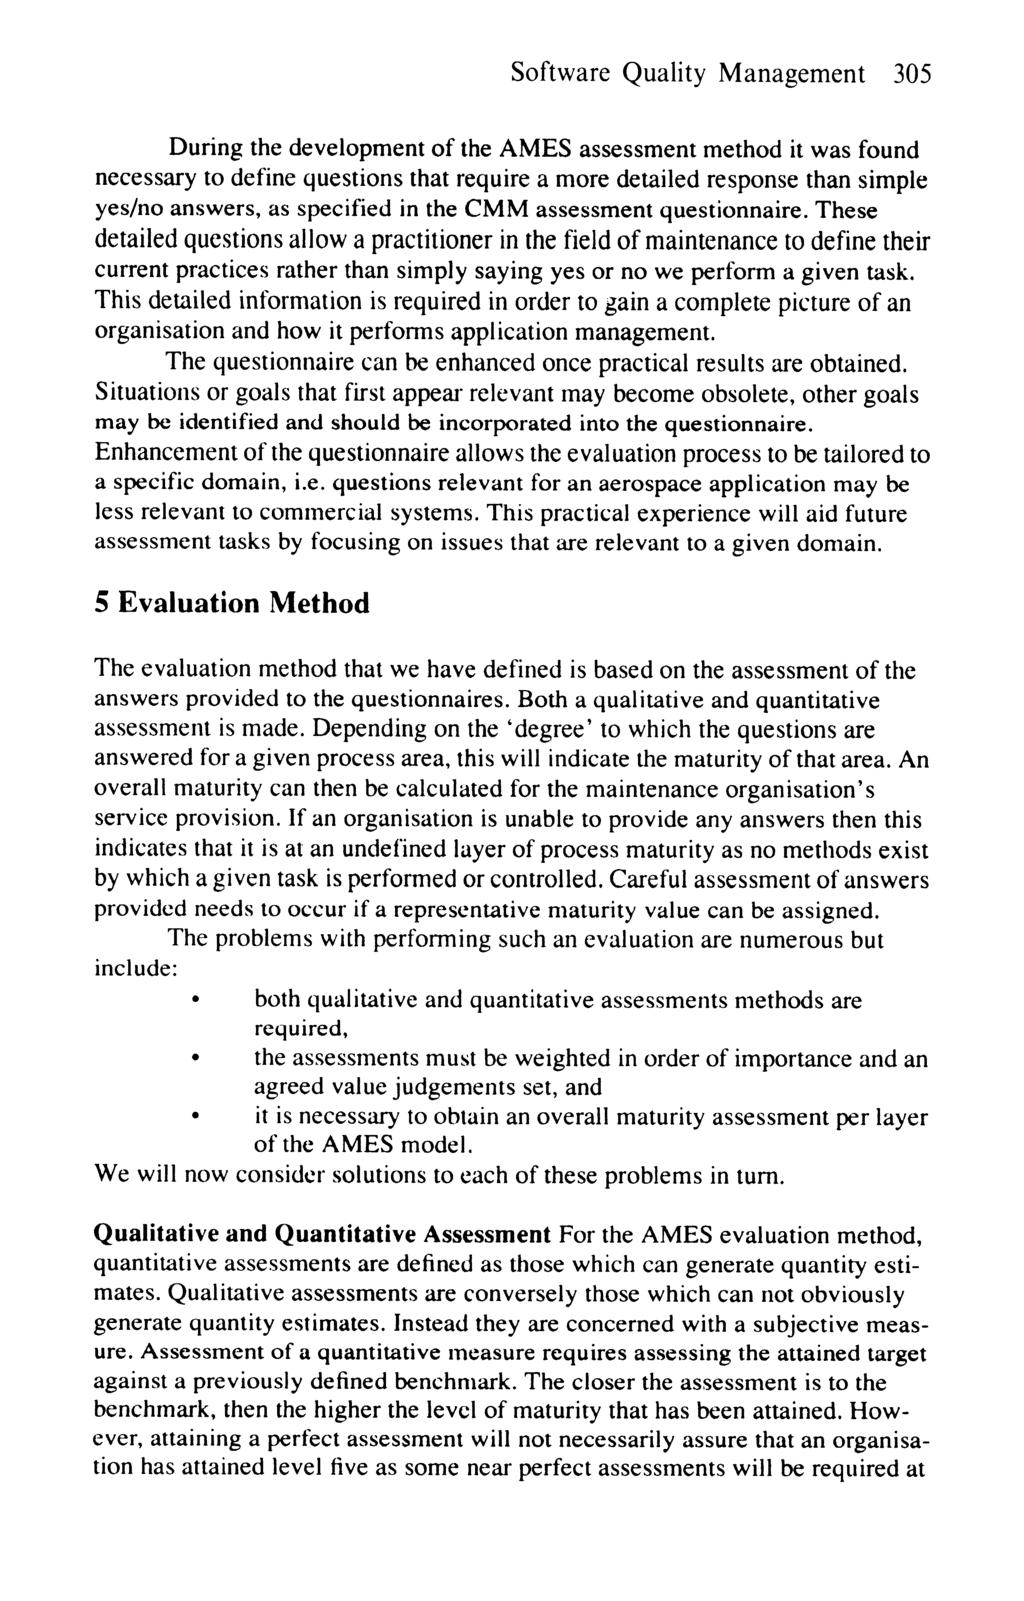 Software Quality Management 305 During the development of the AMES assessment method it was found necessary to define questions that require a more detailed response than simple yes/no answers, as